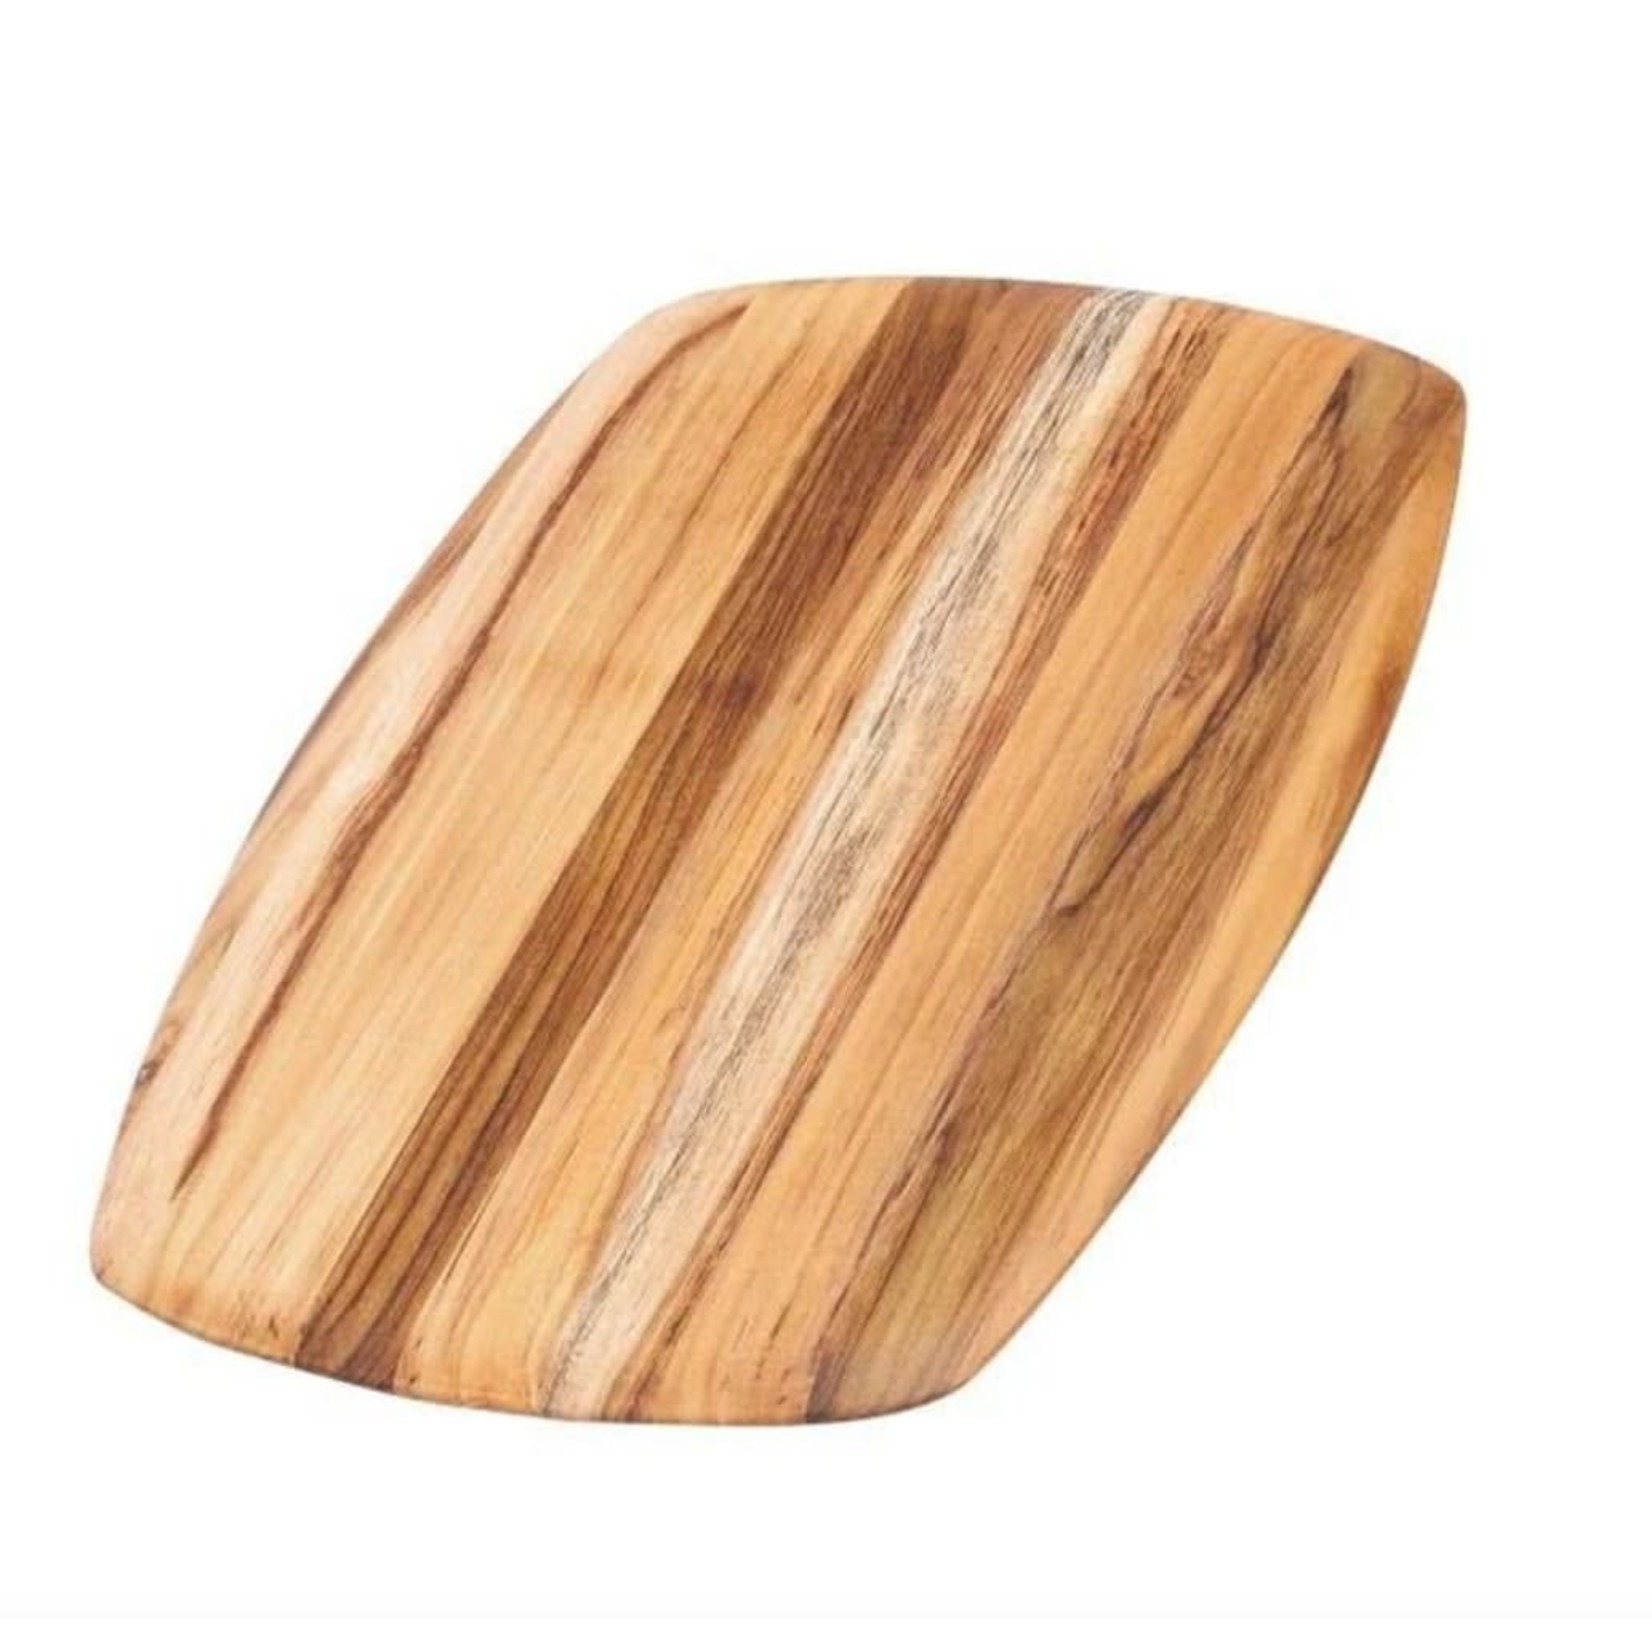 TEAKHAUS TEAKHAUS Rounded Edge Cutting / Serving Board 22.5x5"